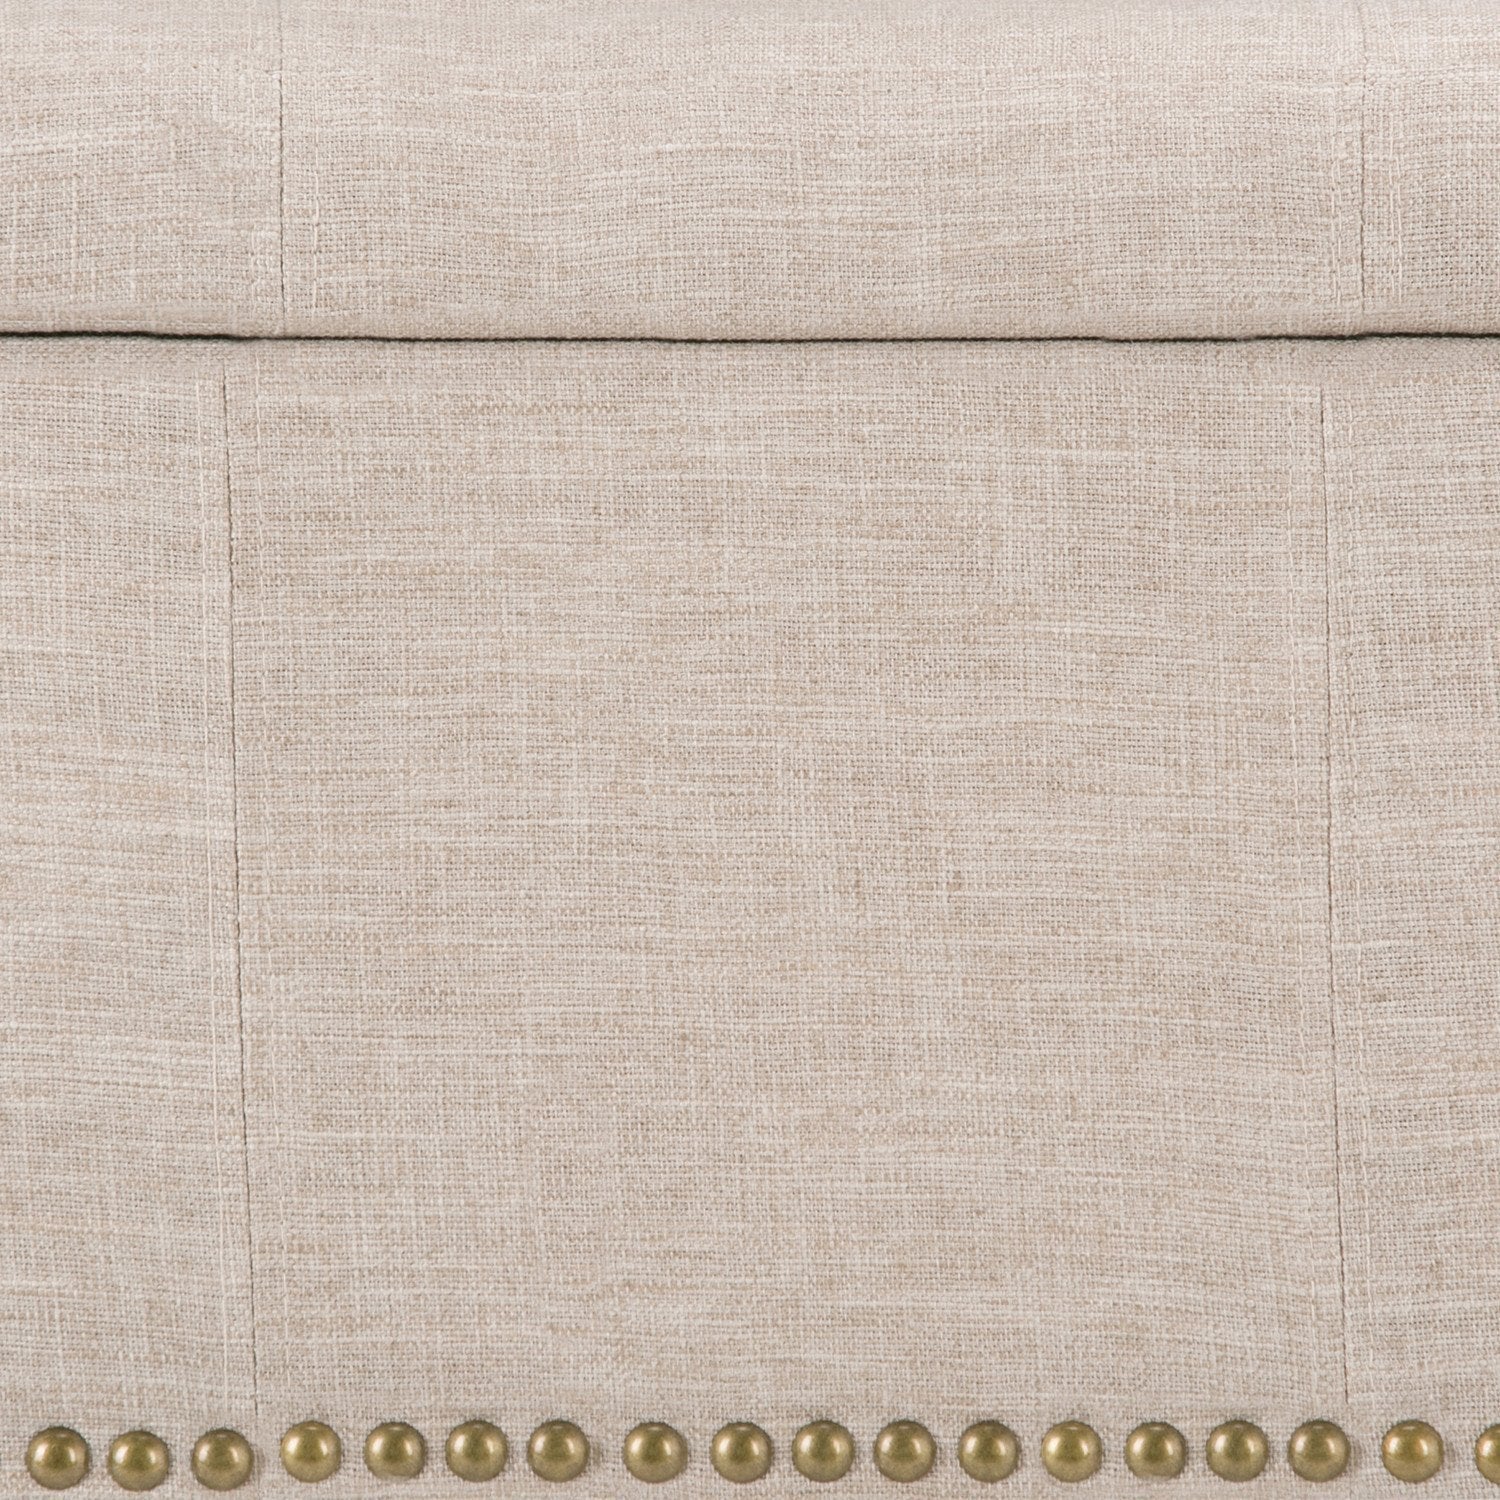 Natural Linen Style Fabric | Kingsley Linen Look Storage Ottoman